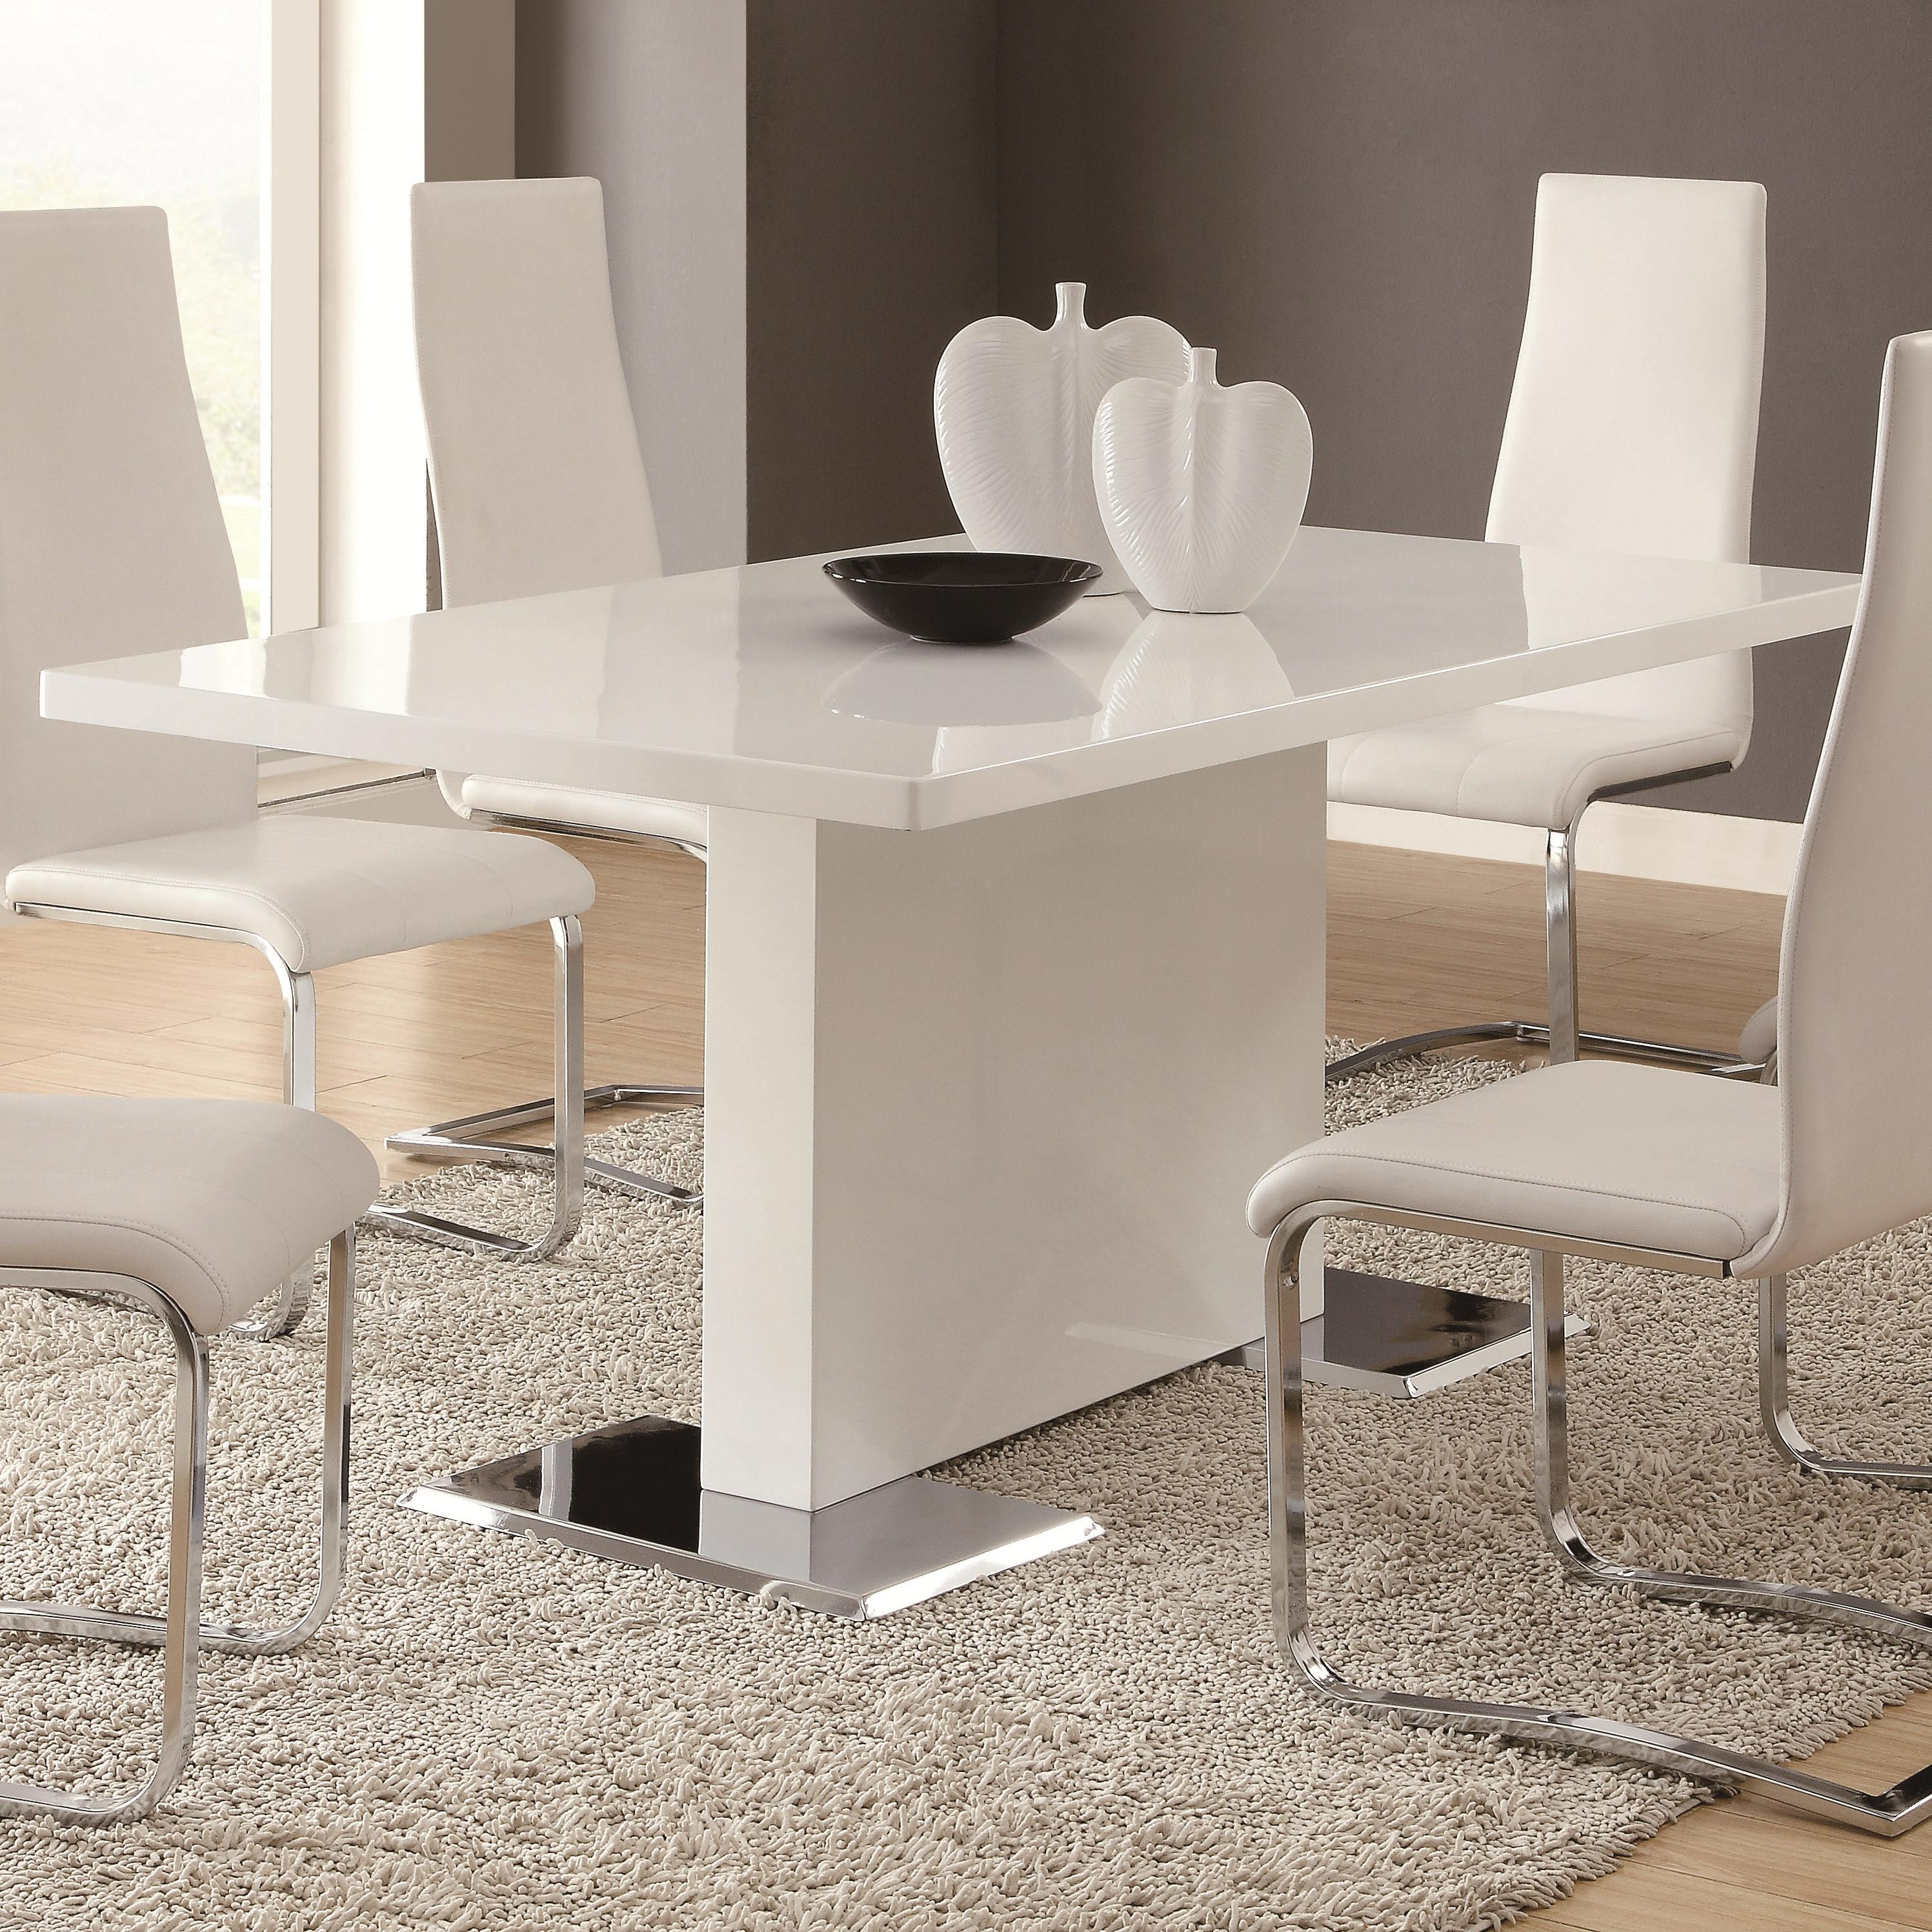 Best ideas about White Dining Table
. Save or Pin Coaster Modern Dining White Dining Table with Now.